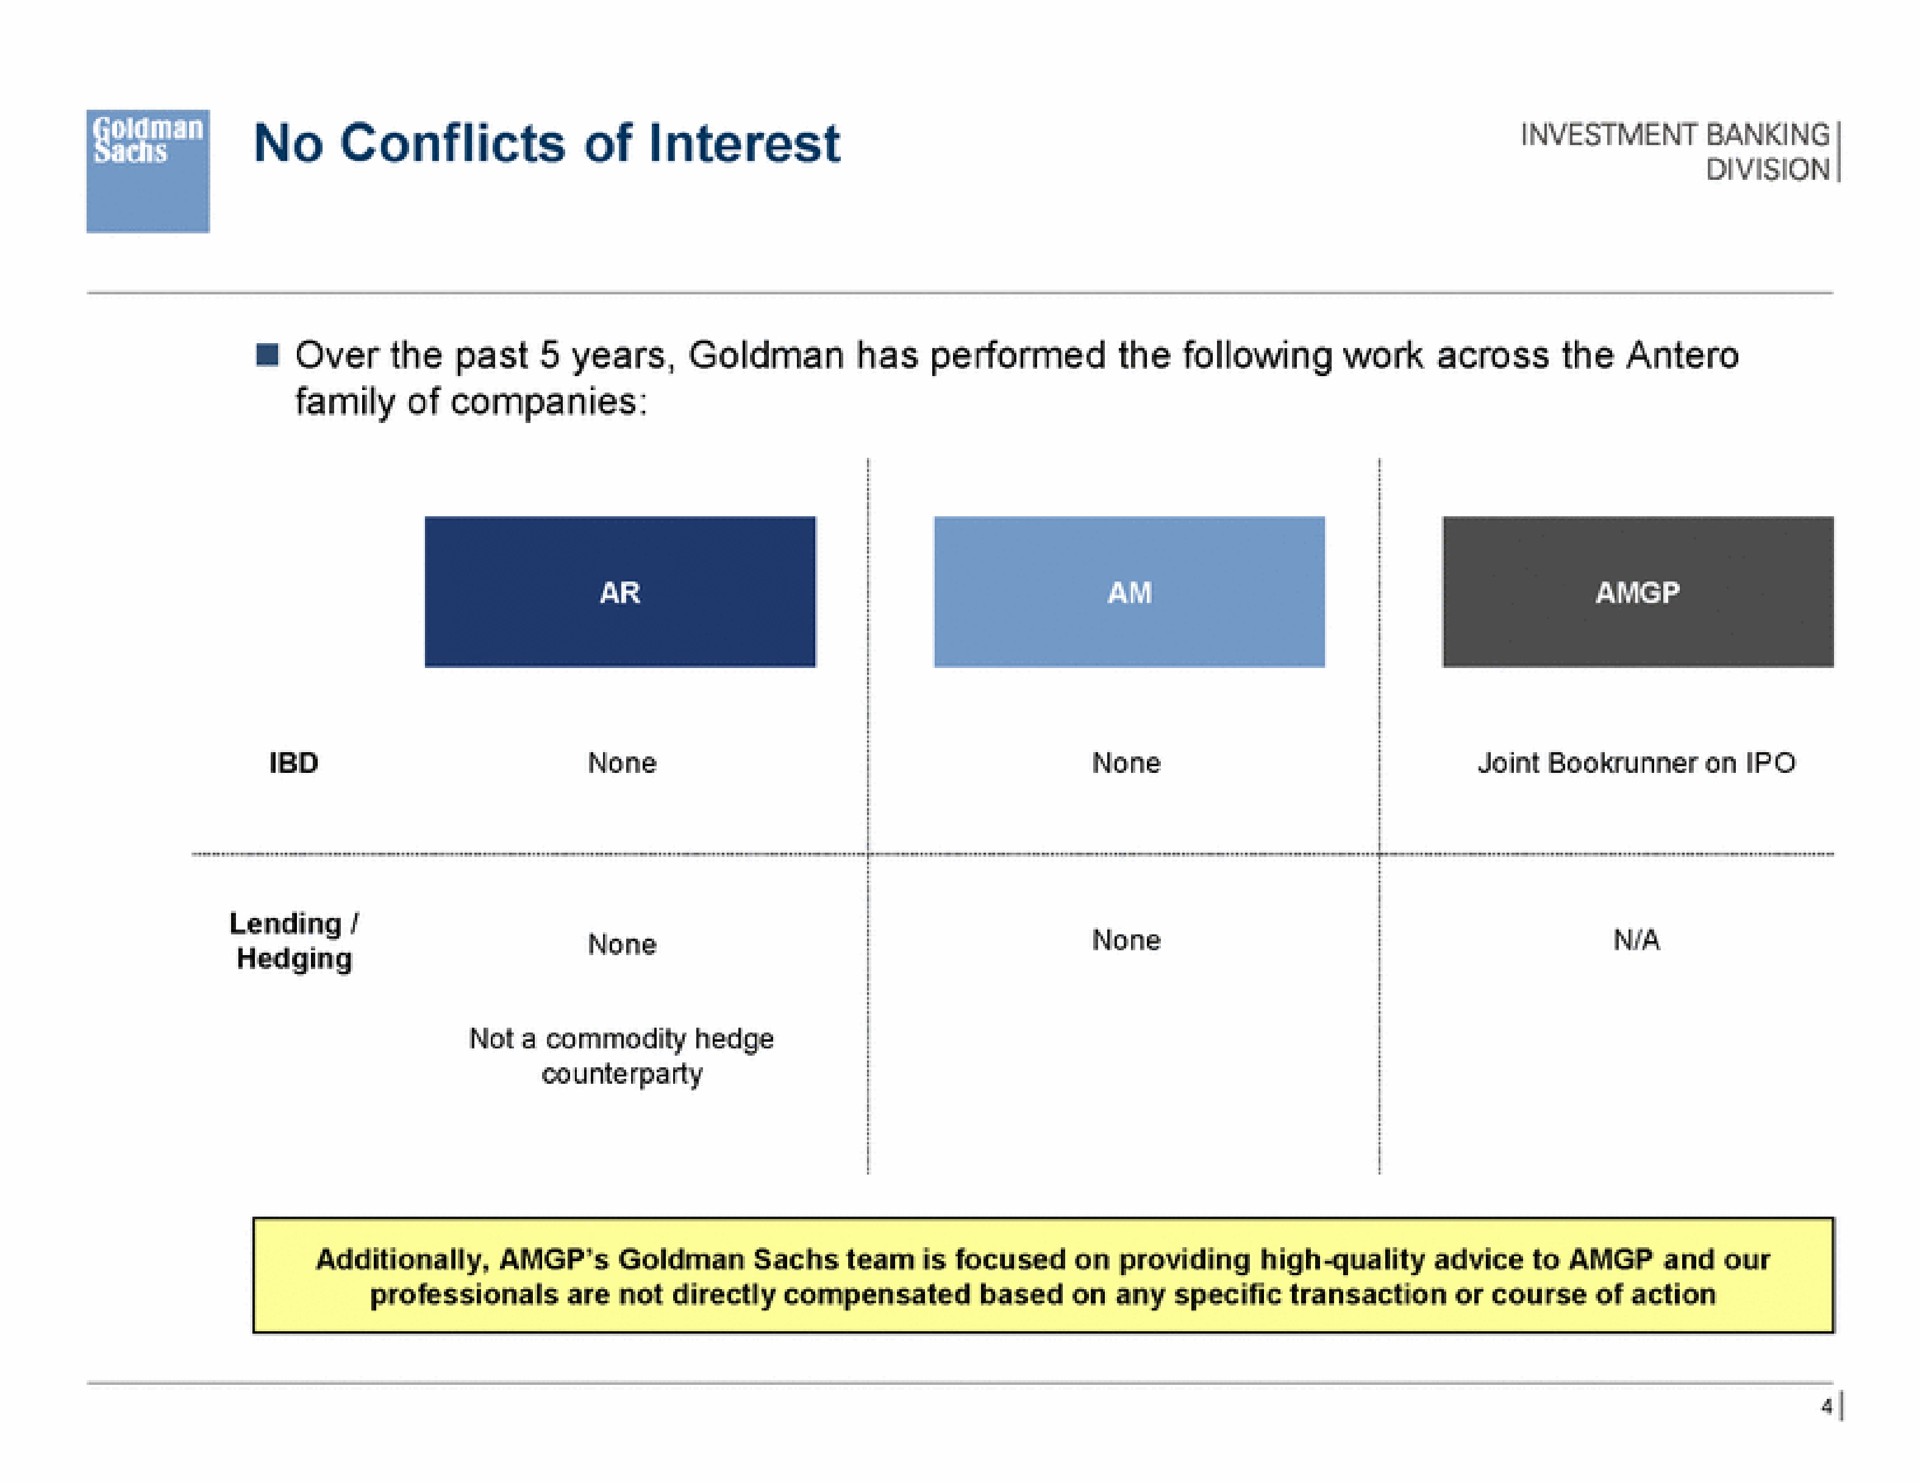 no conflicts of interest investment banking i | Goldman Sachs